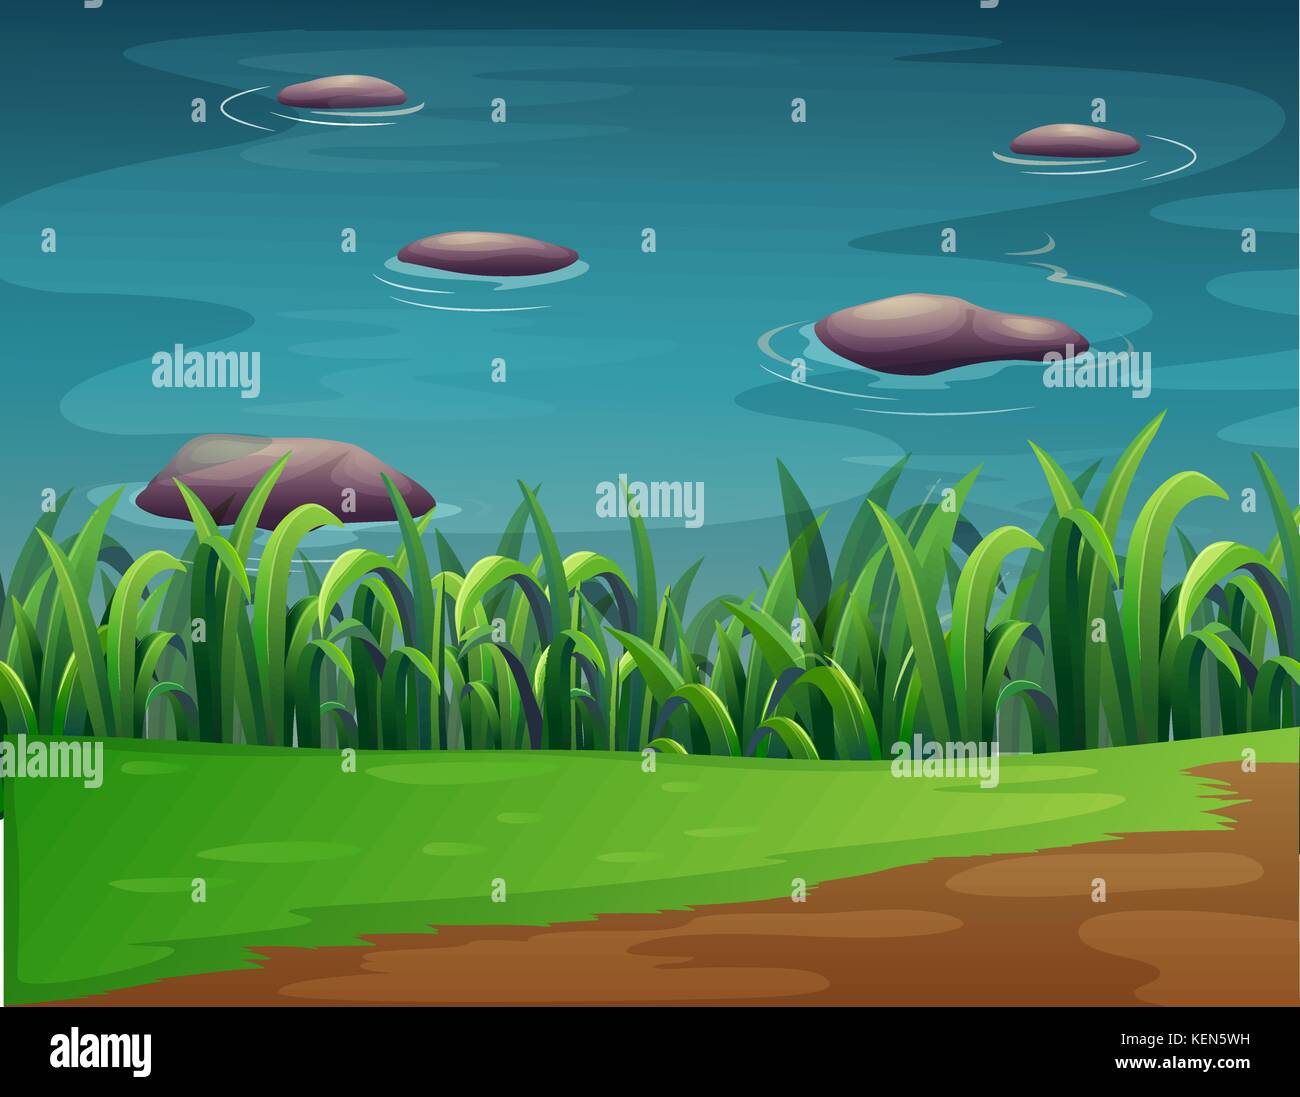 Illustration of a pond with rocks Stock Vector